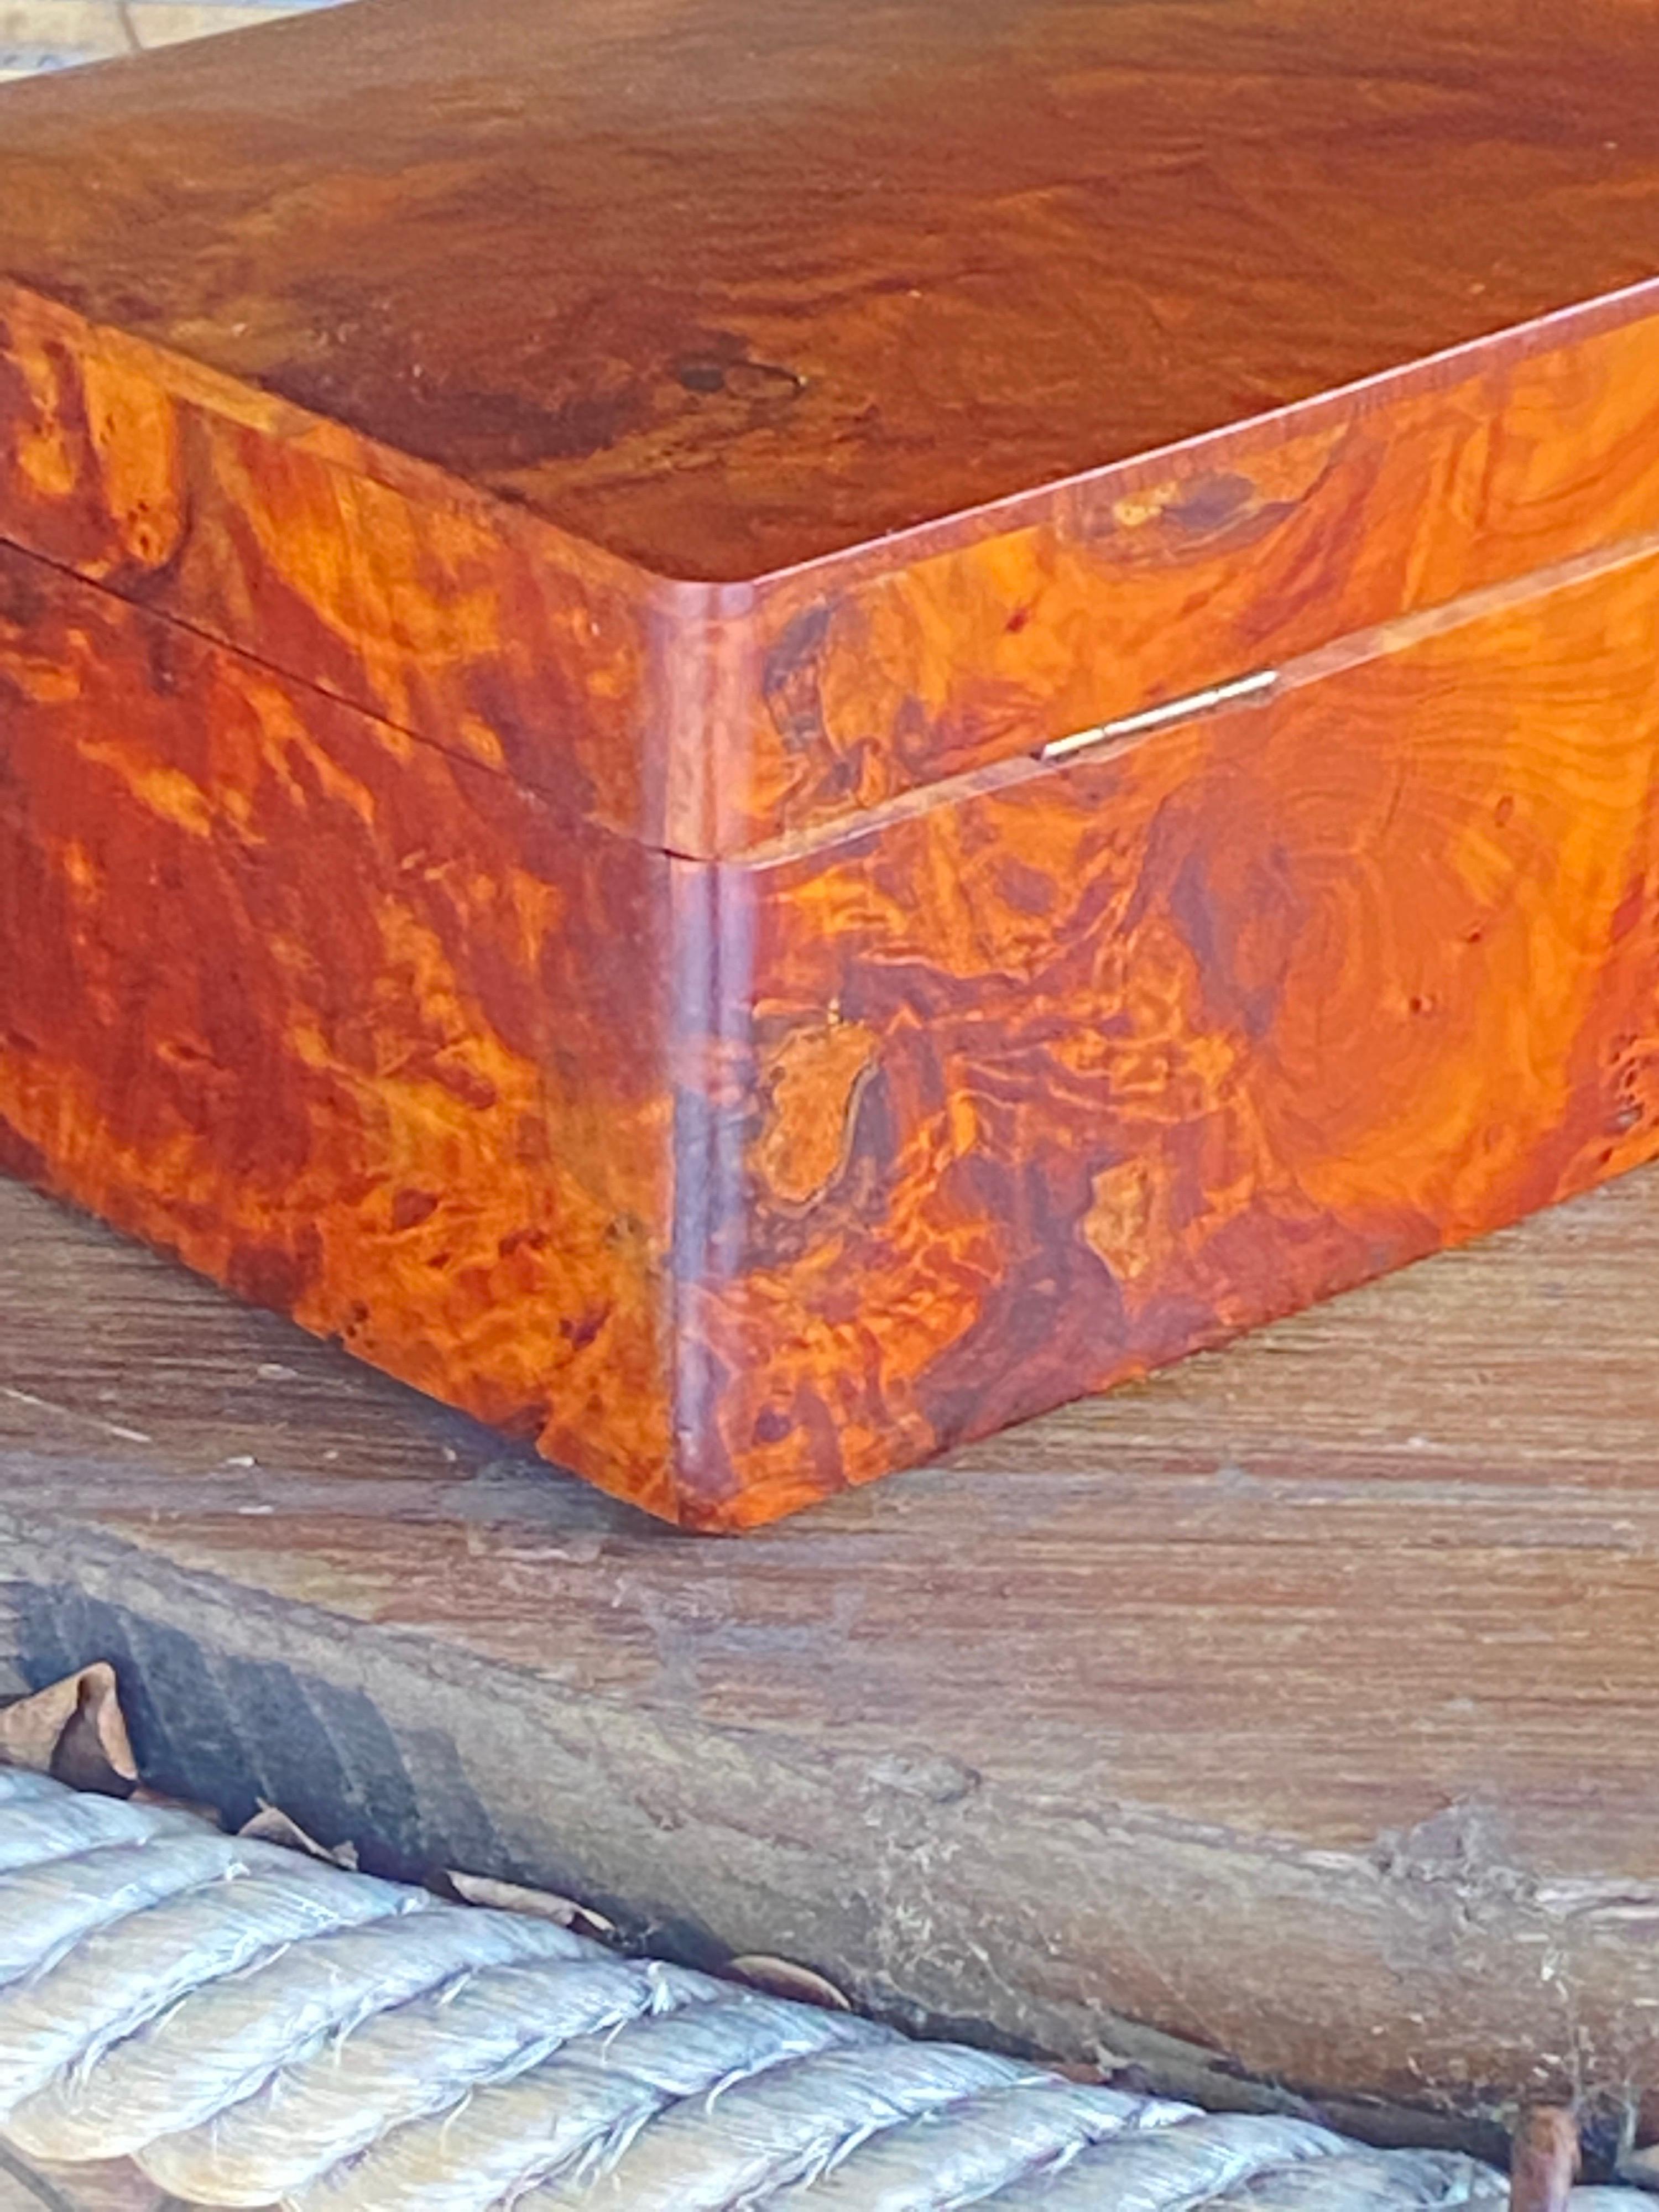 Cigar Box, in Burl Wood, England 1970, Brown Color, with a Second Box Inside 1